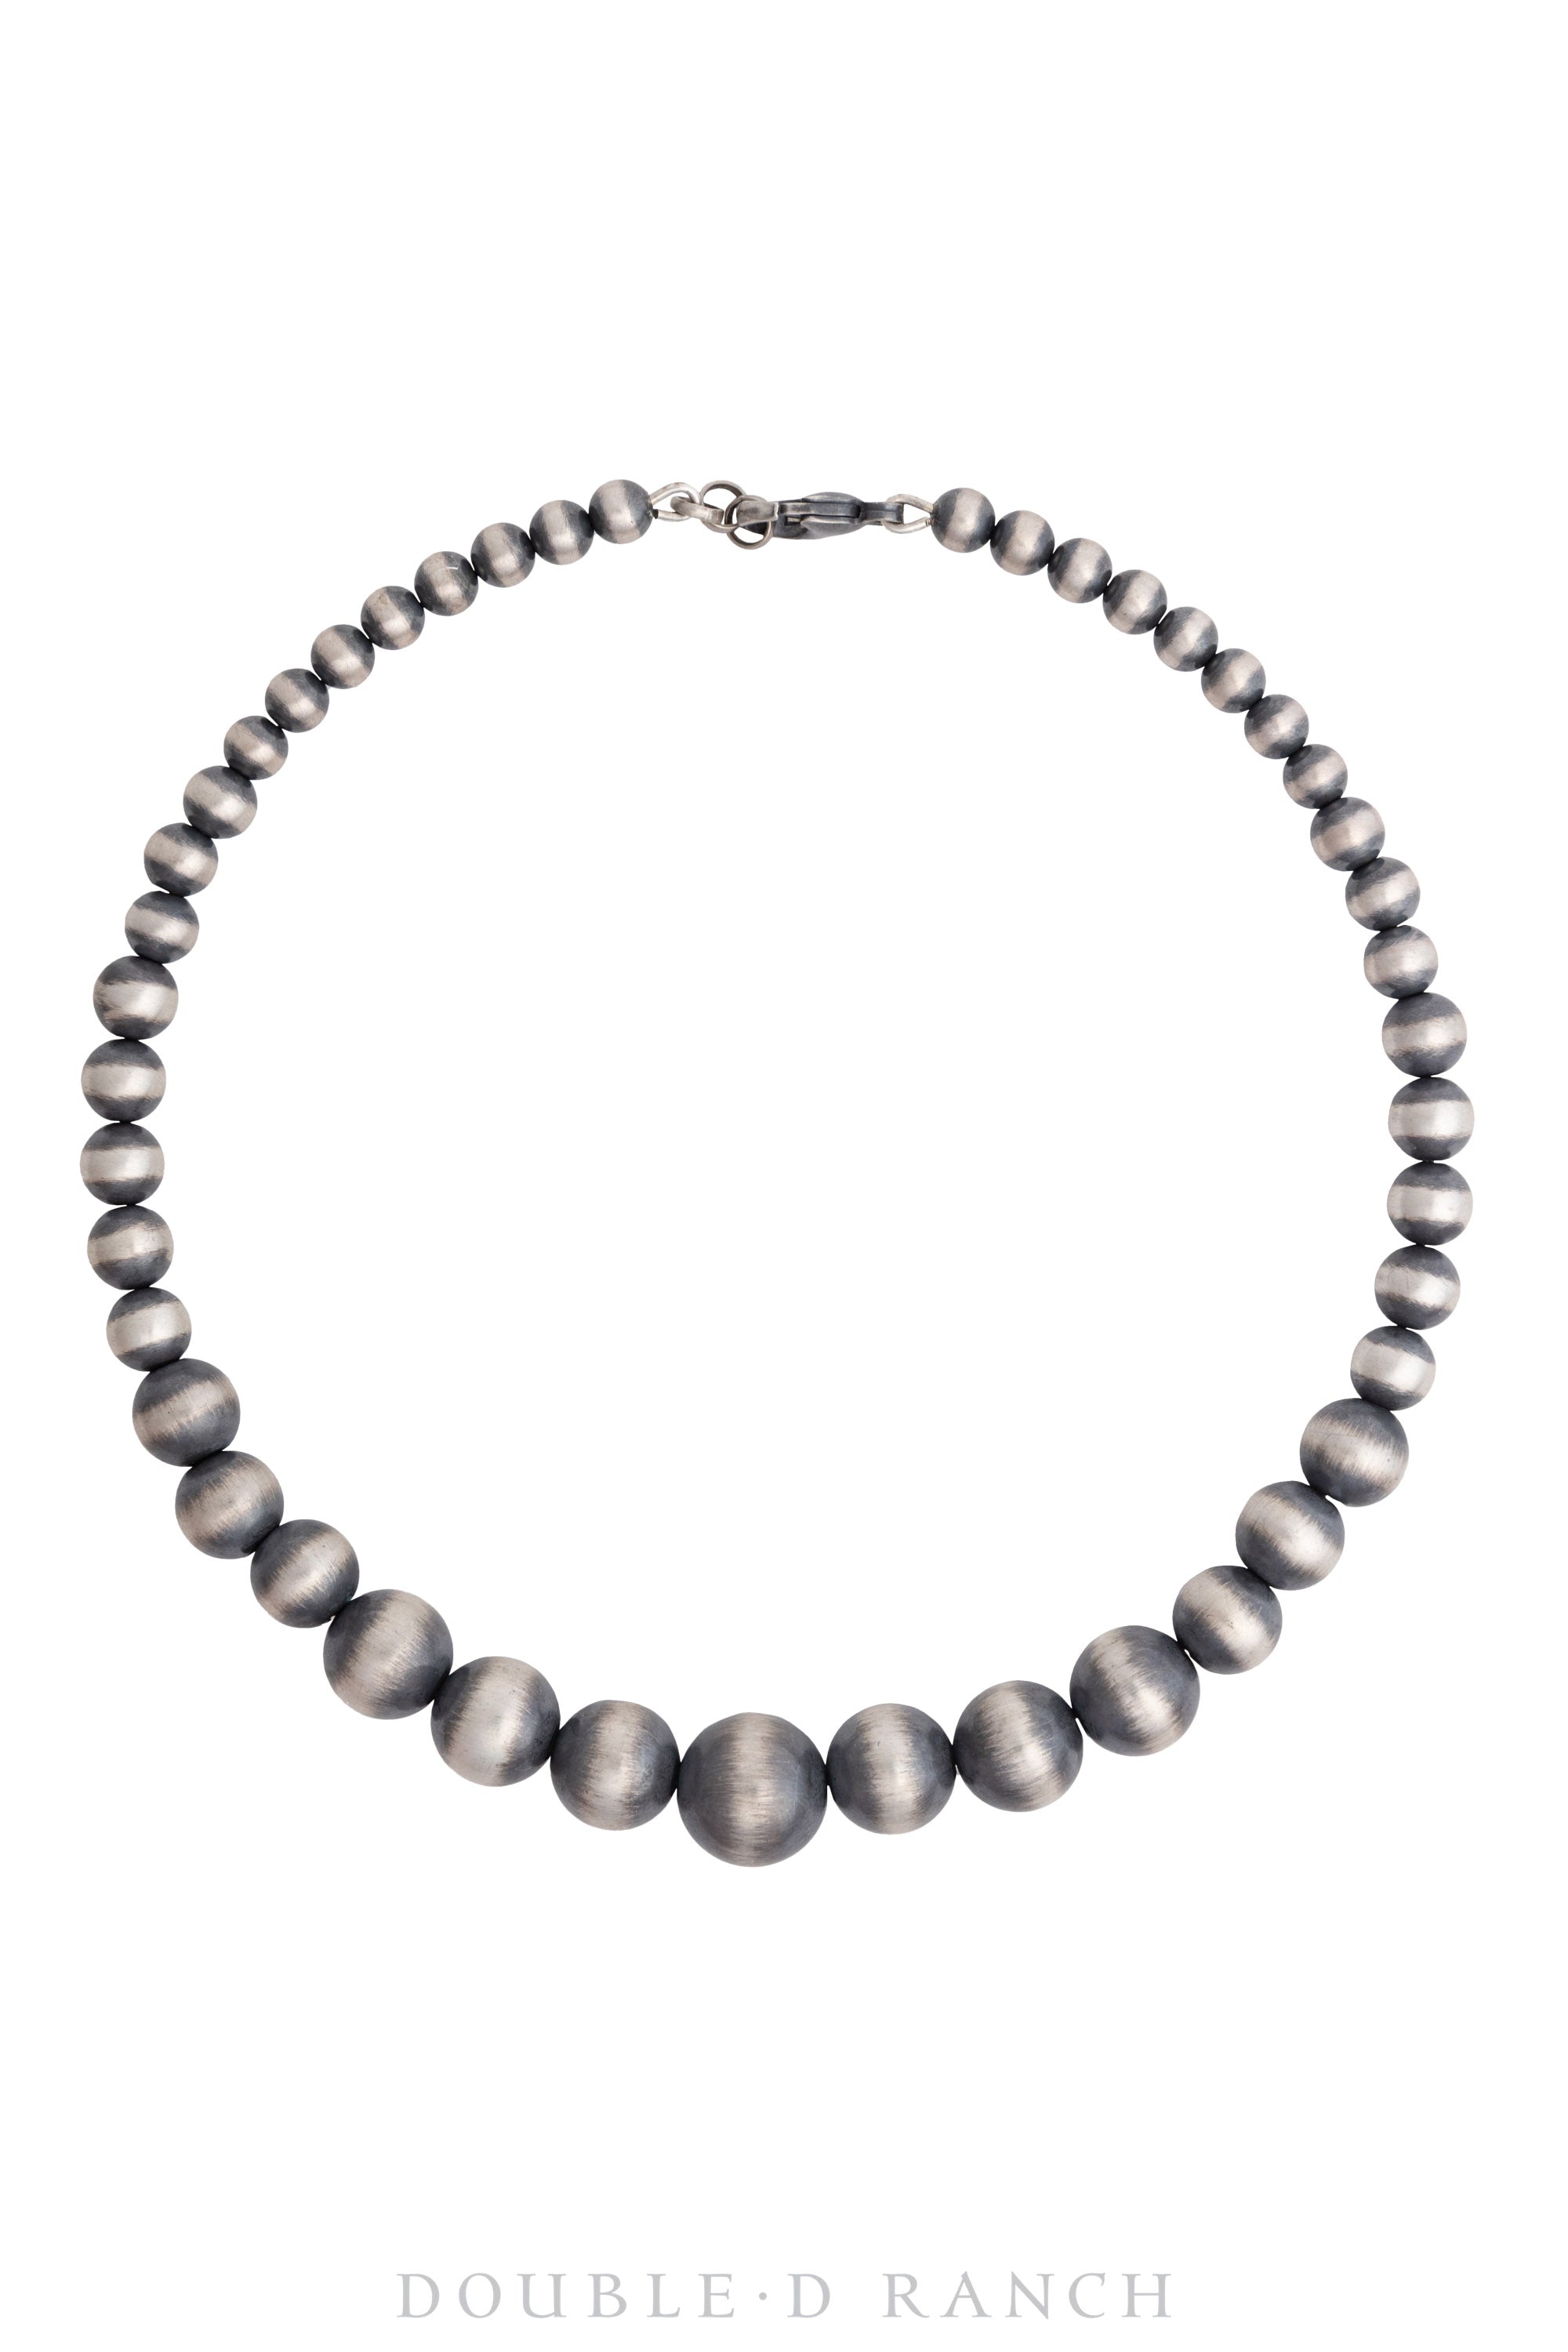 Necklace, Collar, Sterling Silver, Contemporary, 2008B